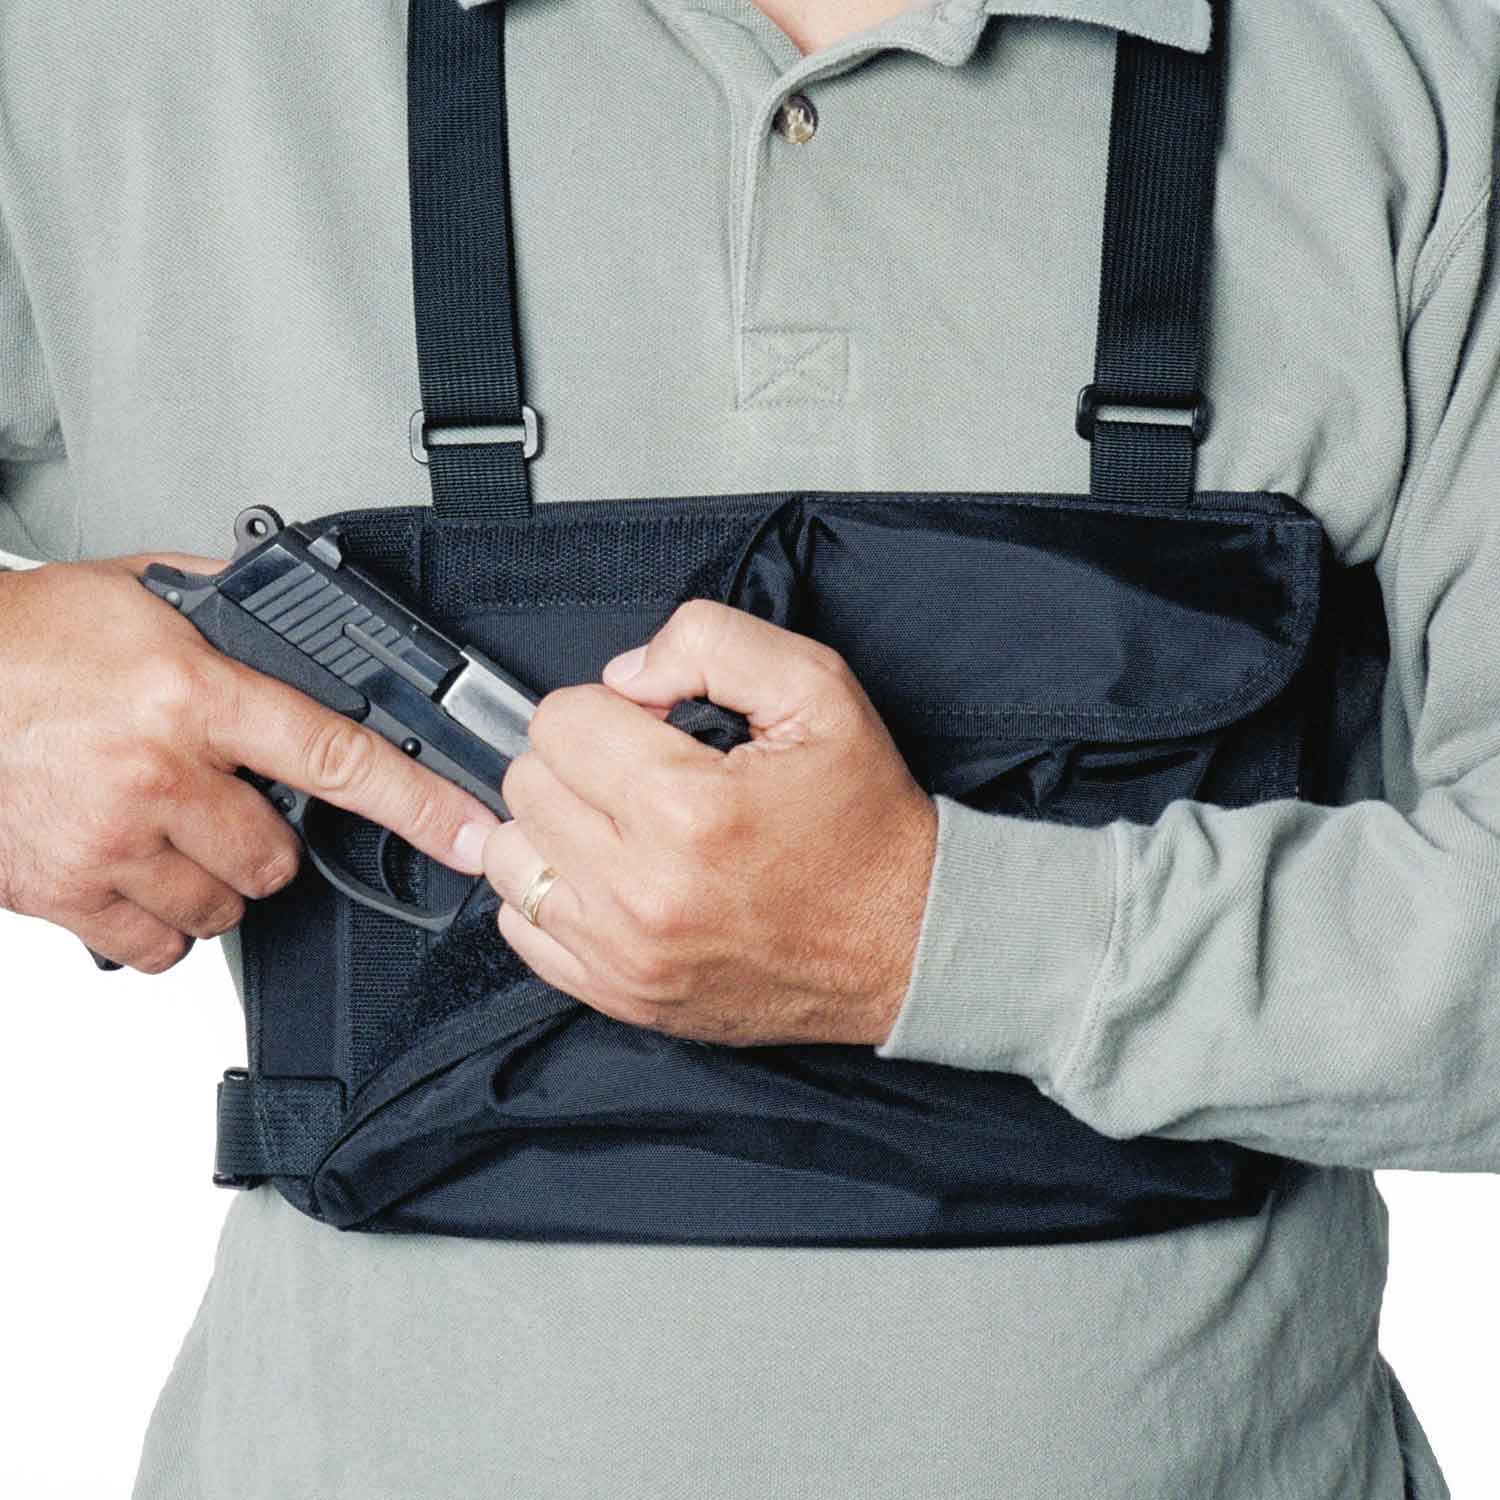 holsters for concealed carry